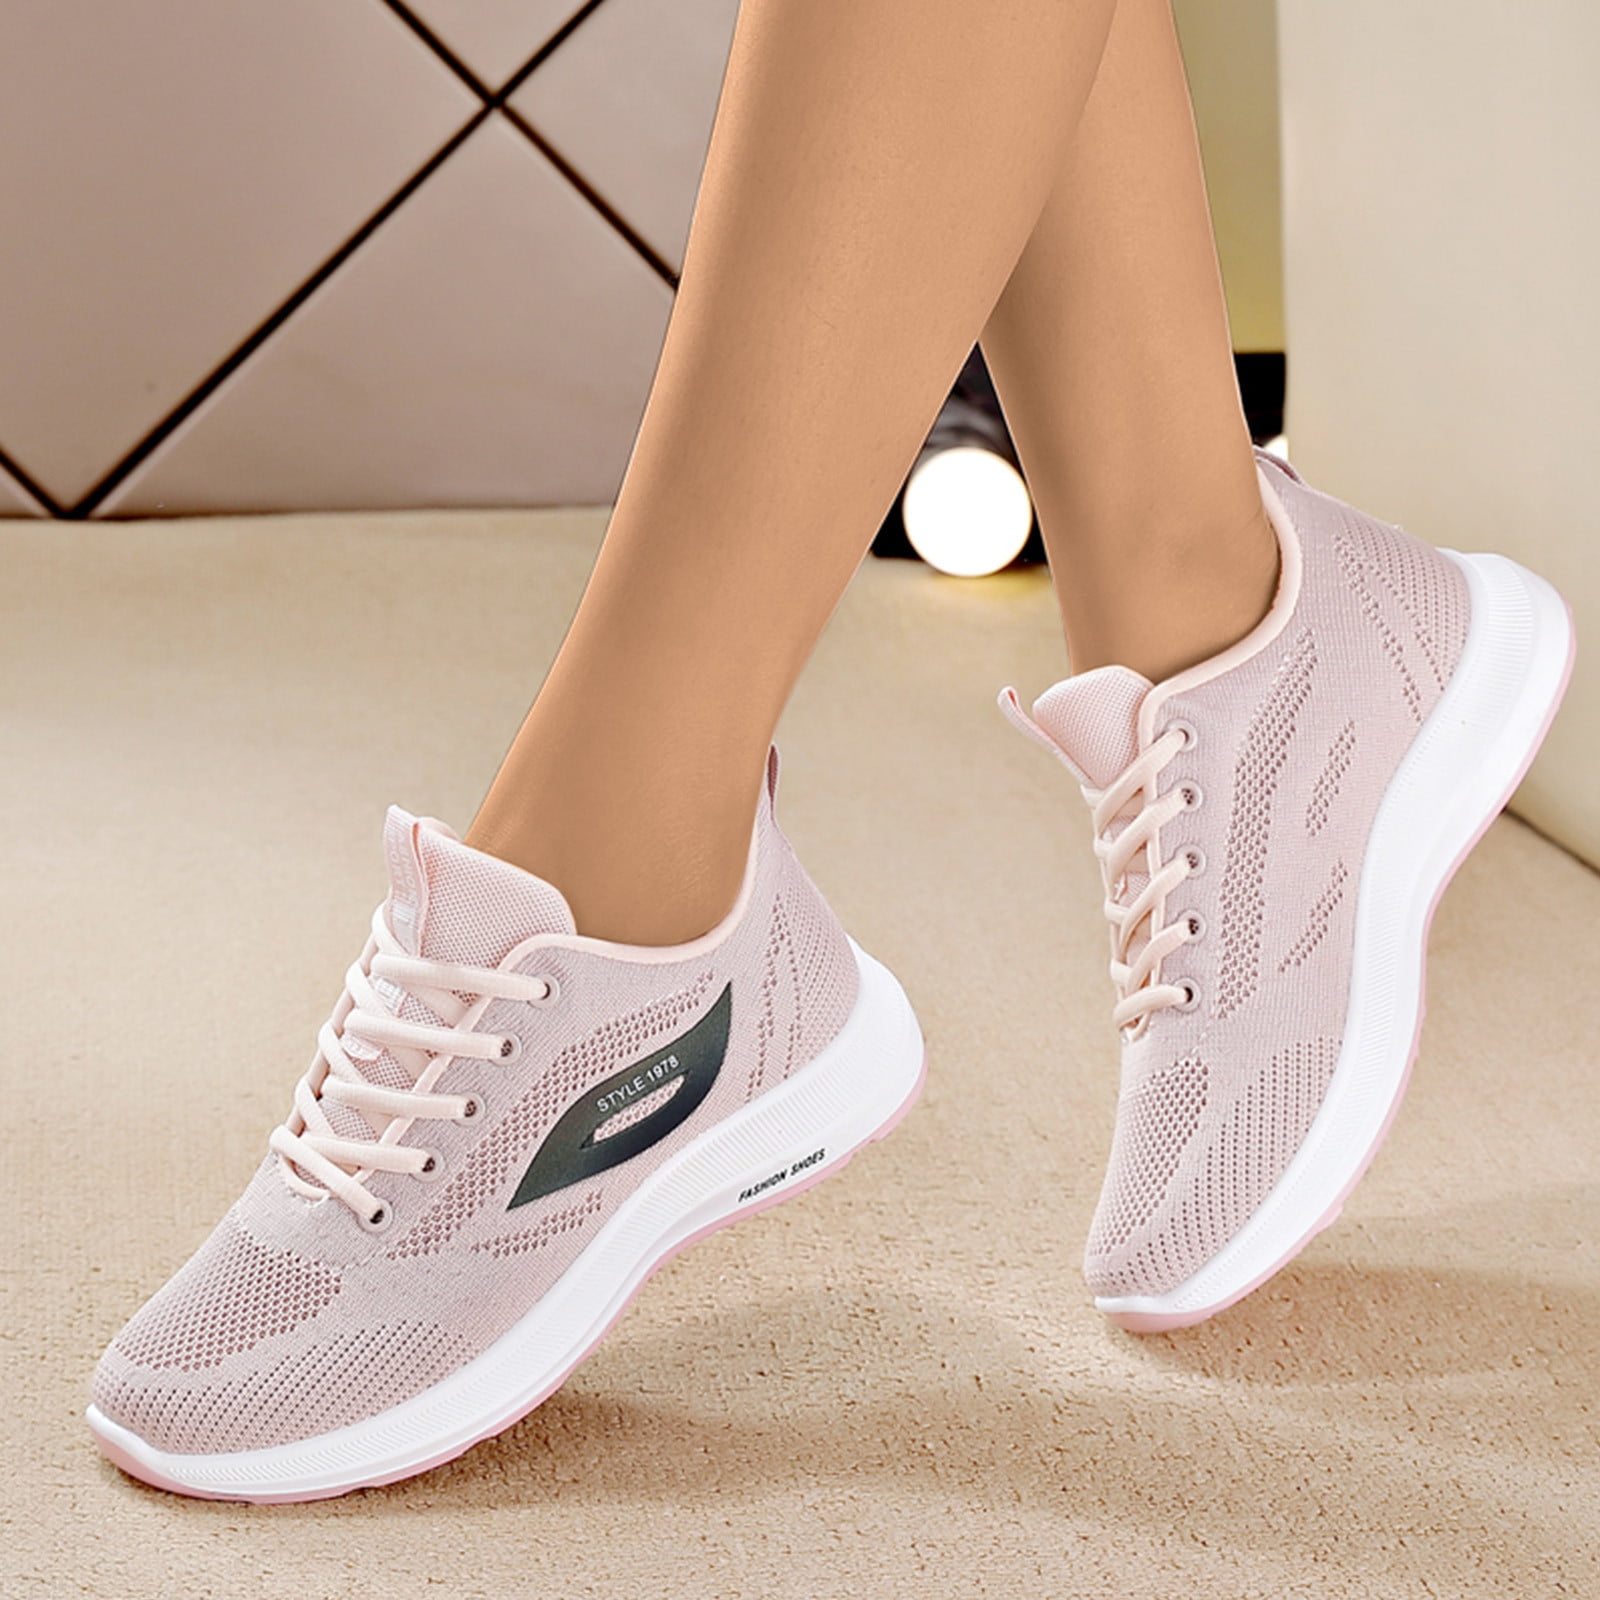 cooki Women's Running Shoes Non Slip Comfortable Breathable Mesh Lightweight Sneakers Outdoor Walking Athletic Tennis Shoes 